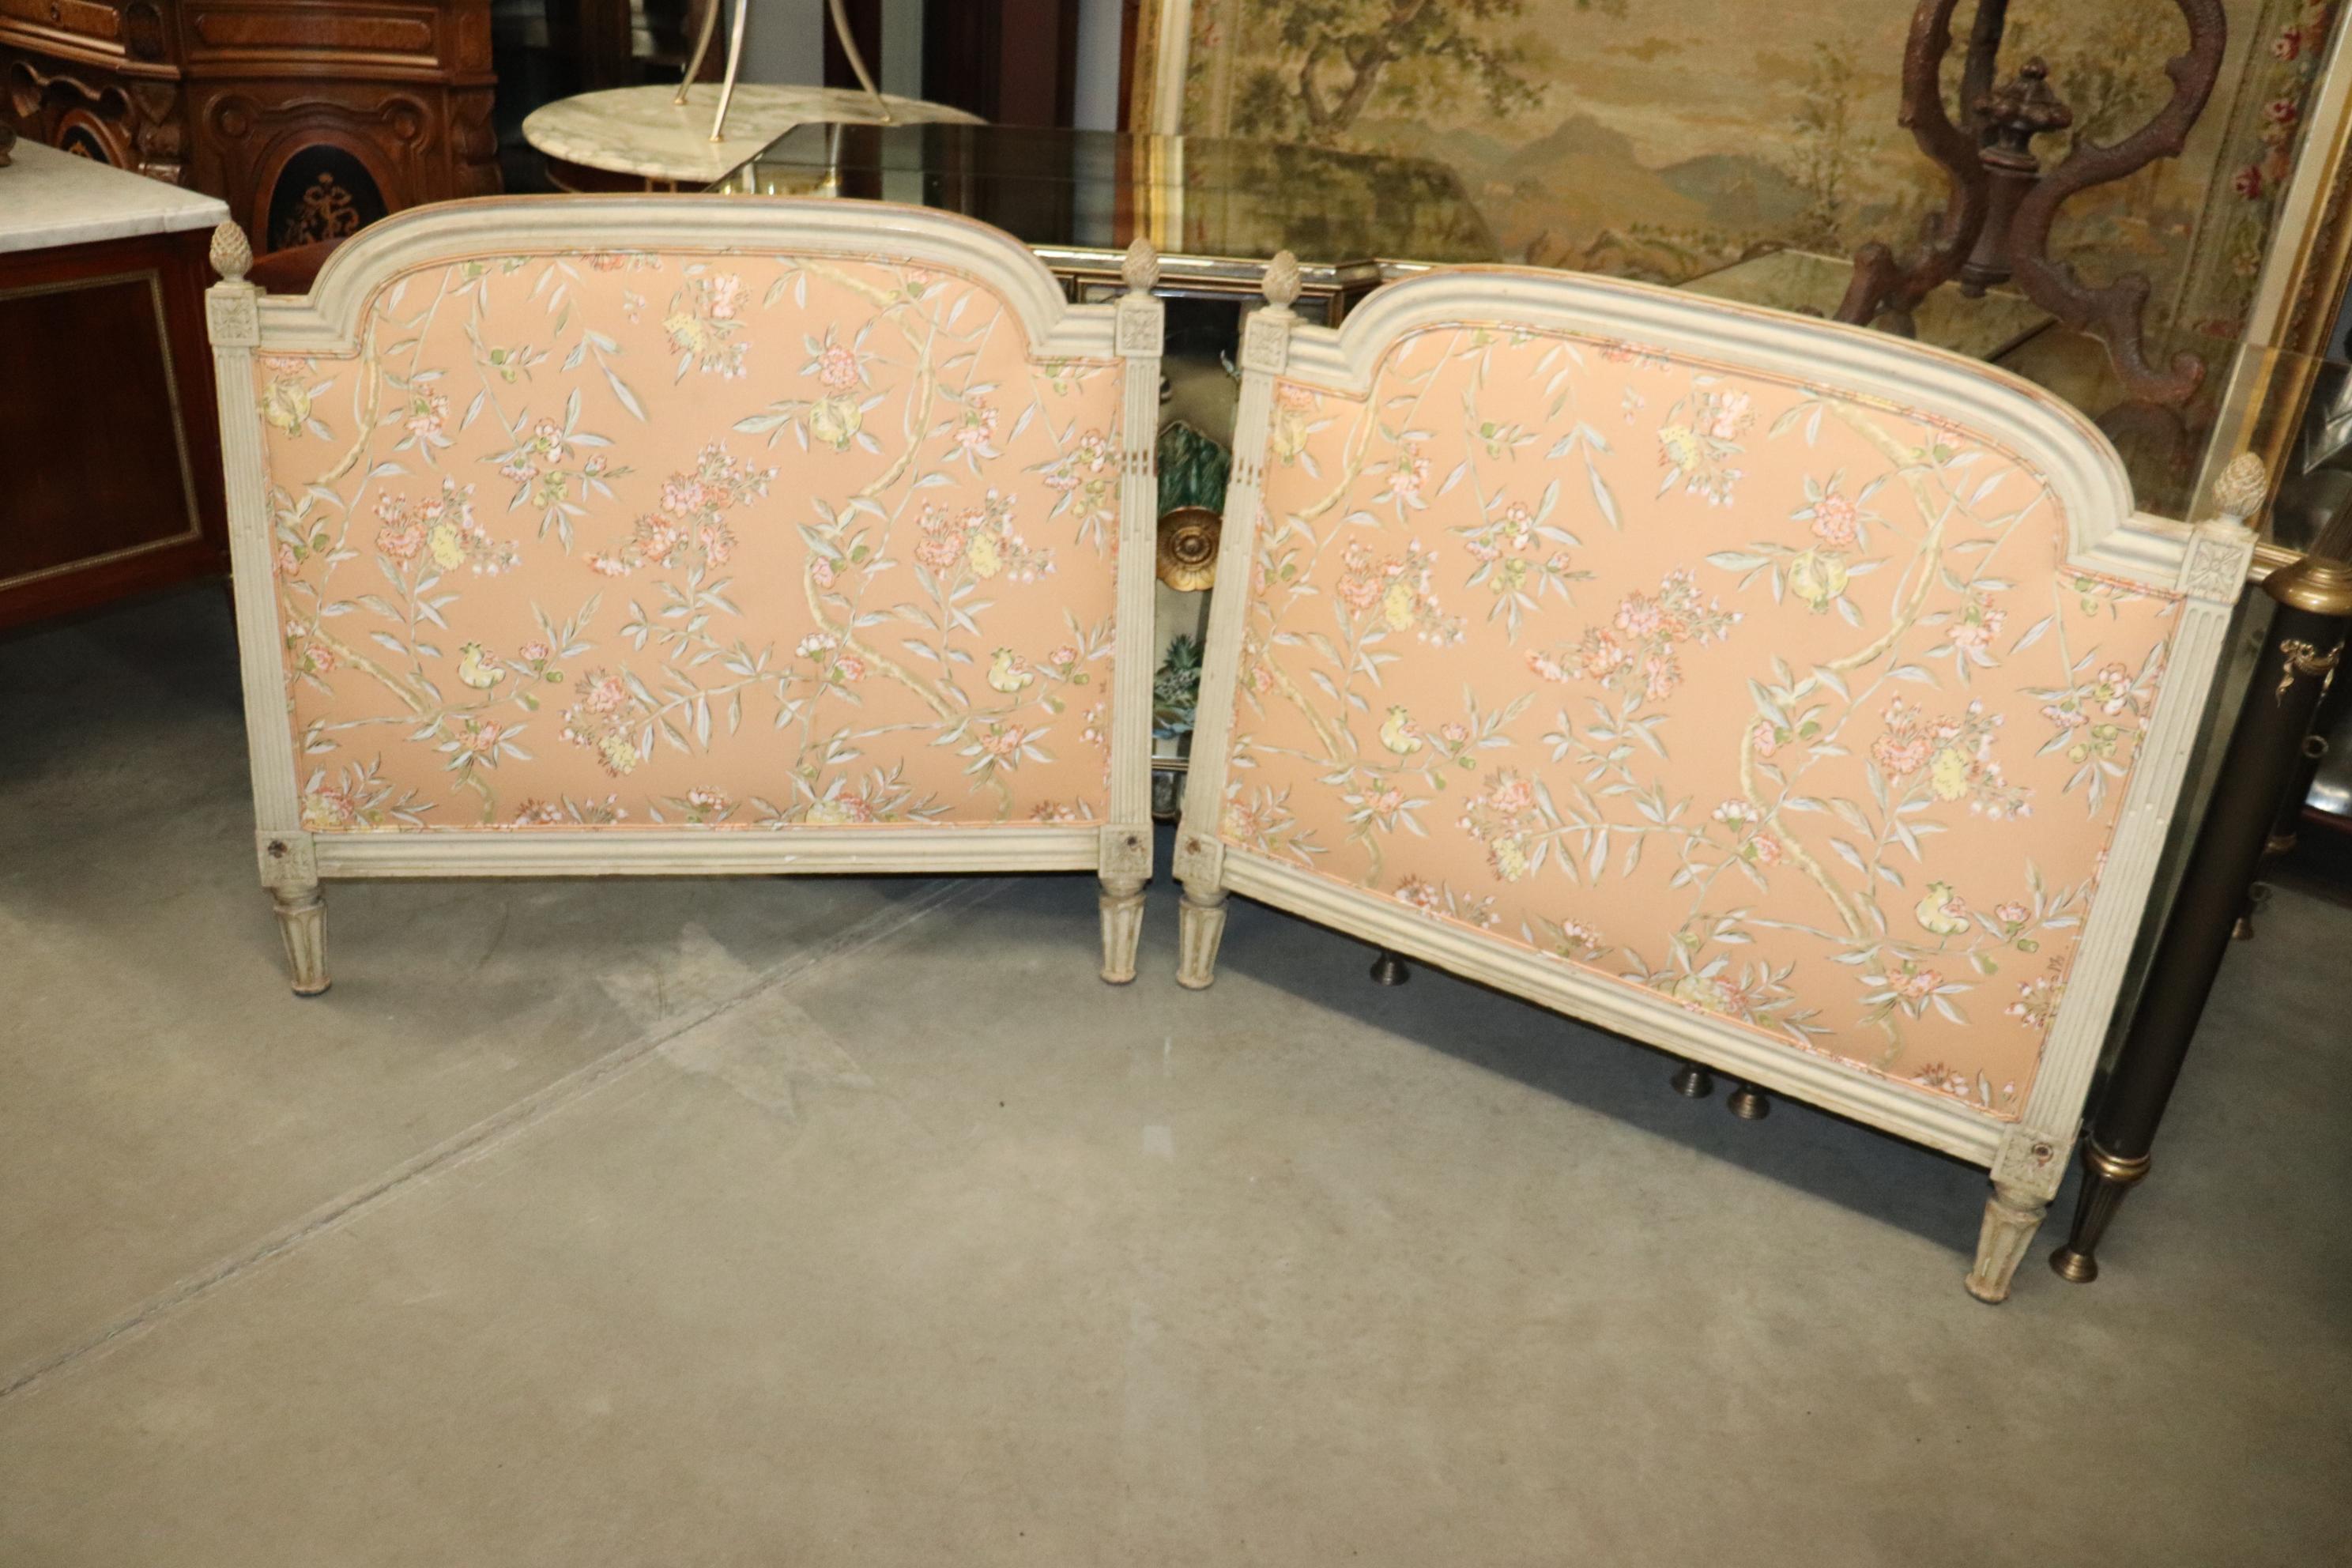 This is a pair of gorgeous French Louis XVI style painted headboards that can be used as twin beds with metal frames attached or even with some customization, a french daybed or chaise. The headboards each date to teh 1940s and measure 43 wide x 2.5